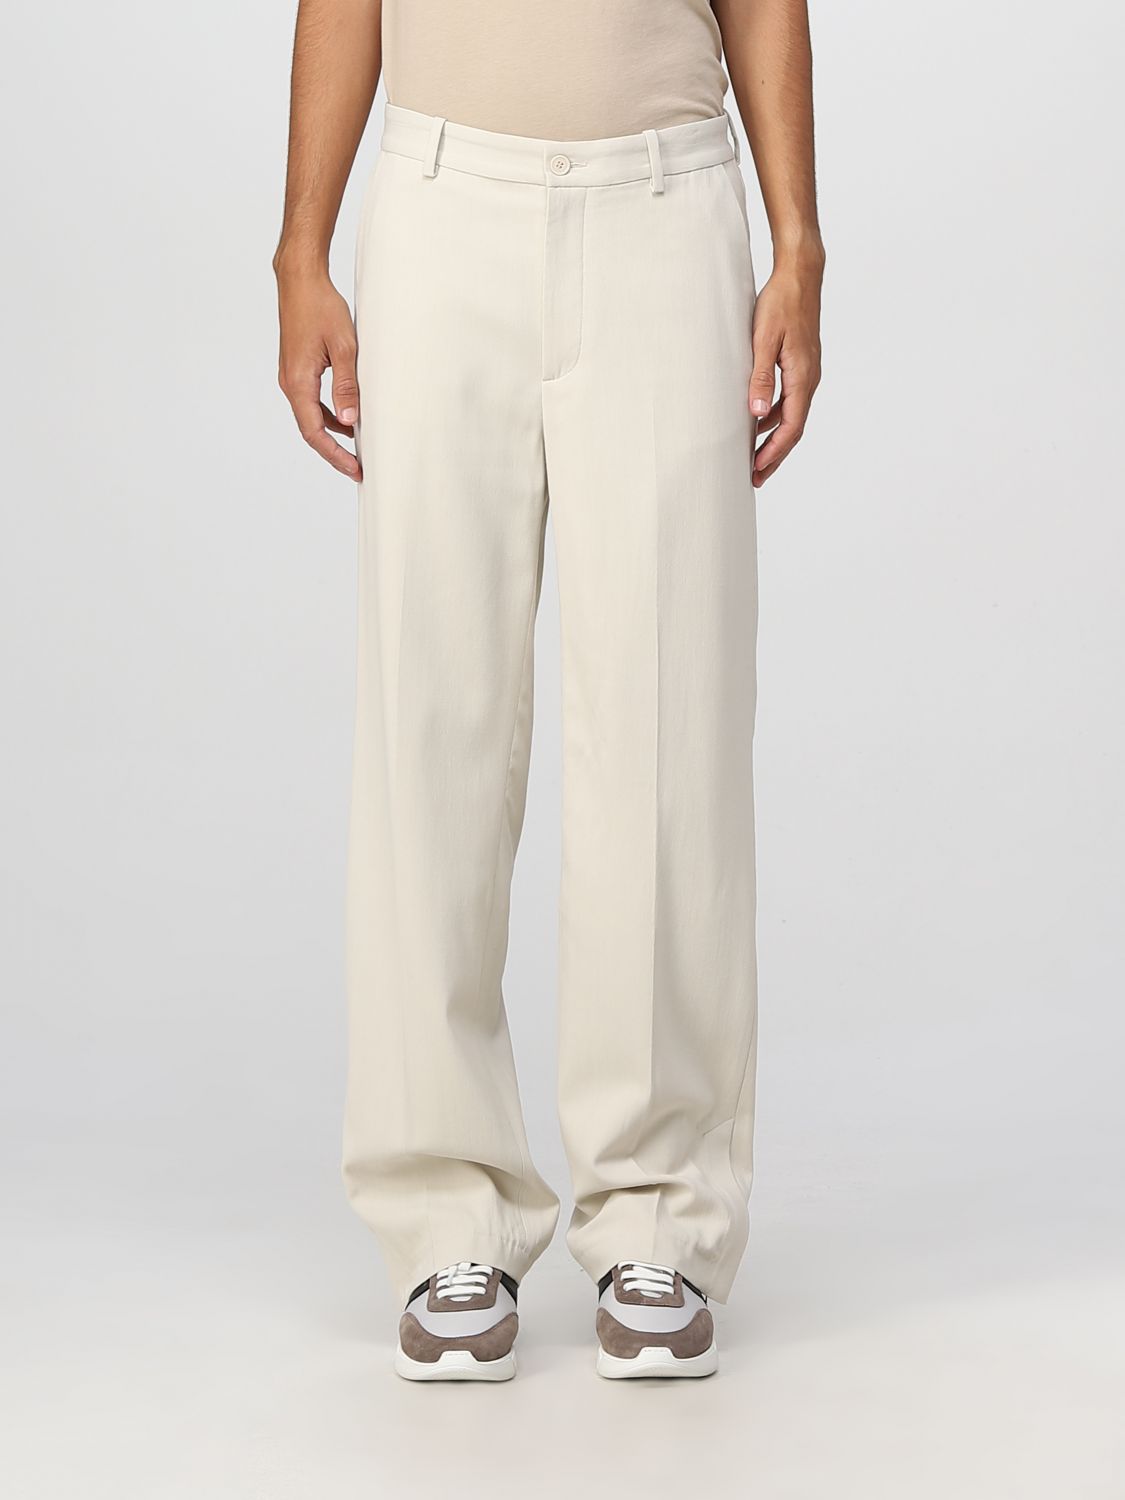 Trousers Axel Arigato: Axel Arigato trousers for men beige 1